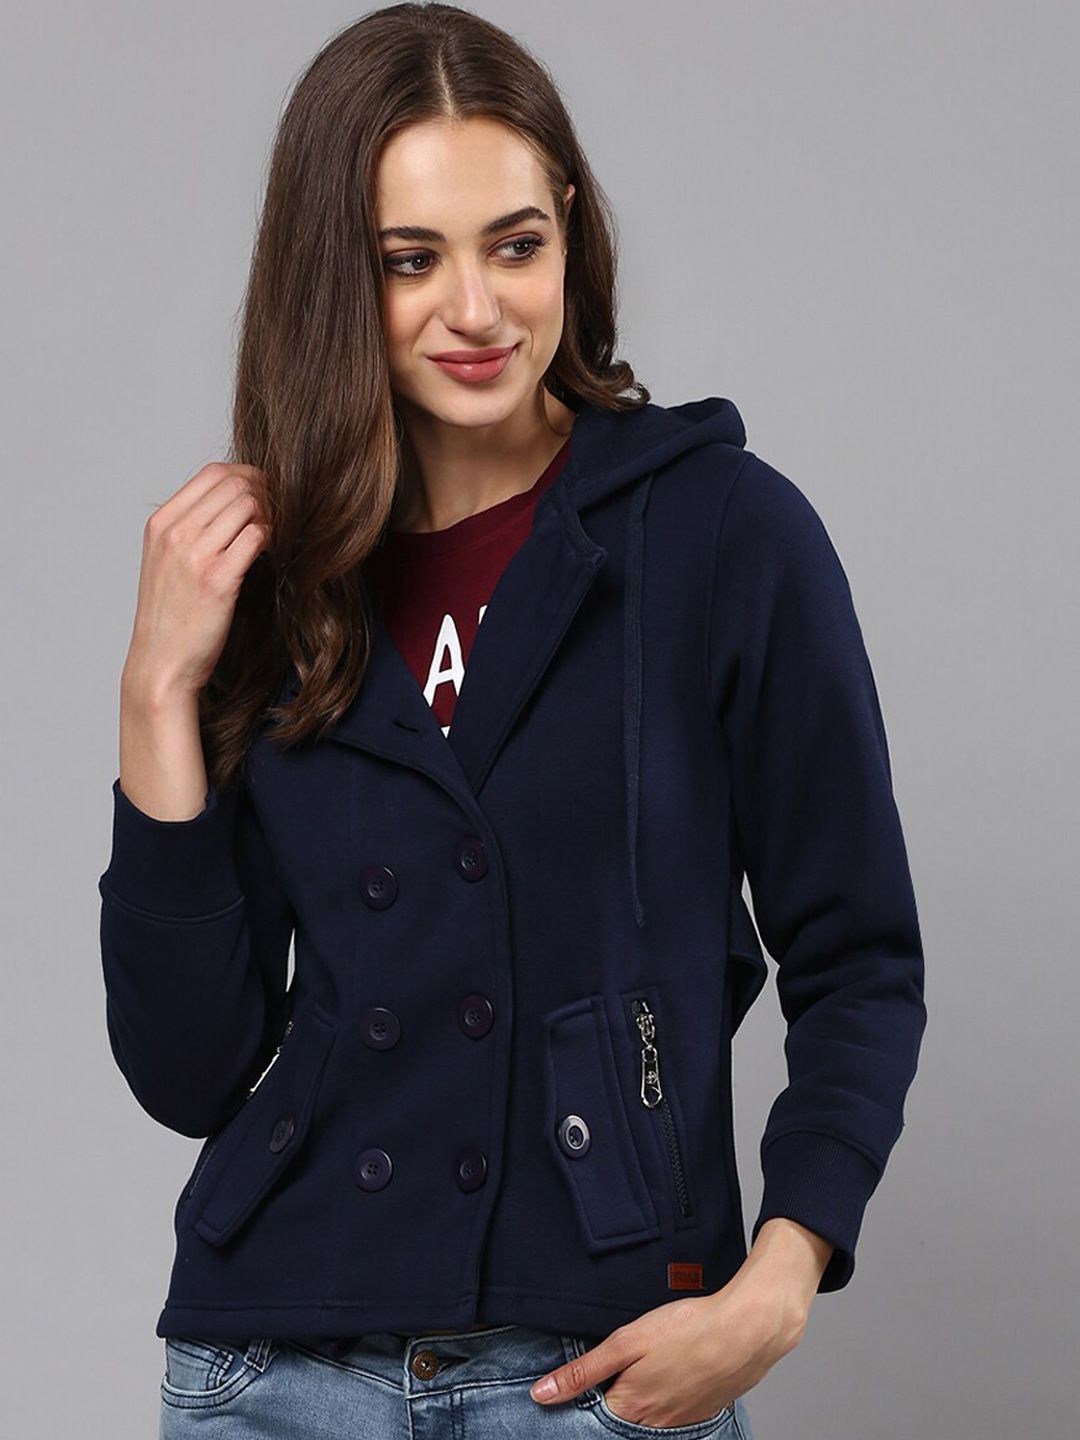 Campus Sutra Women Navy Blue Windcheater Bomber Jacket Price in India